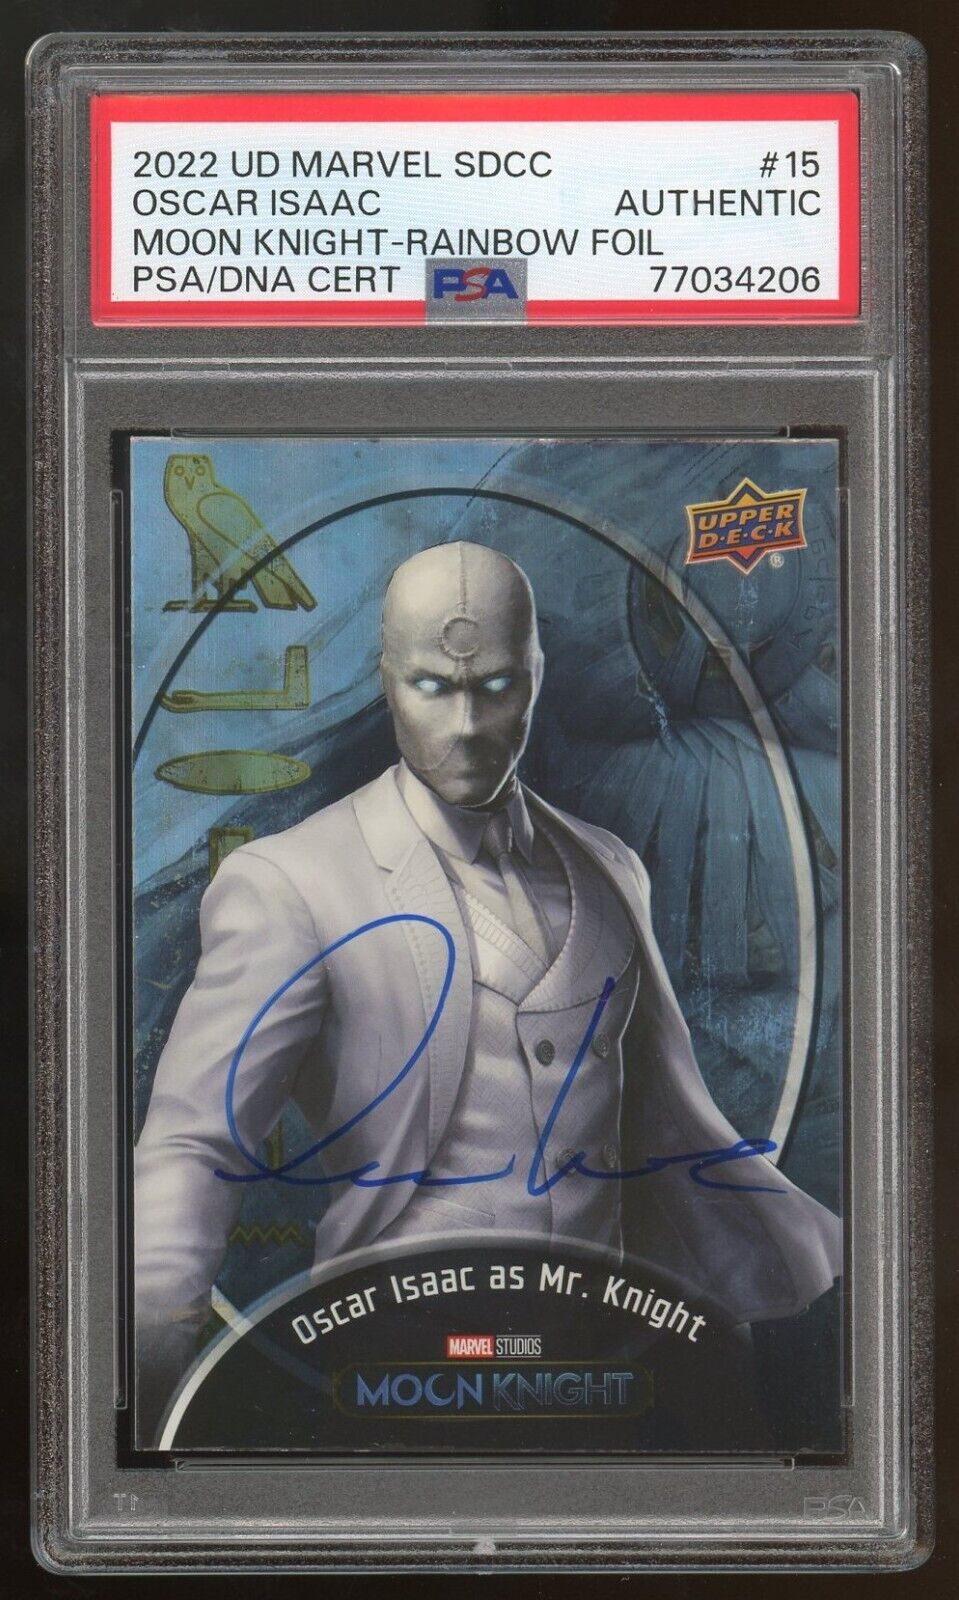 Oscar Isaac Signed 2022 Upper Deck Marvel SDCC Moon Knight PSA Certified AUTO